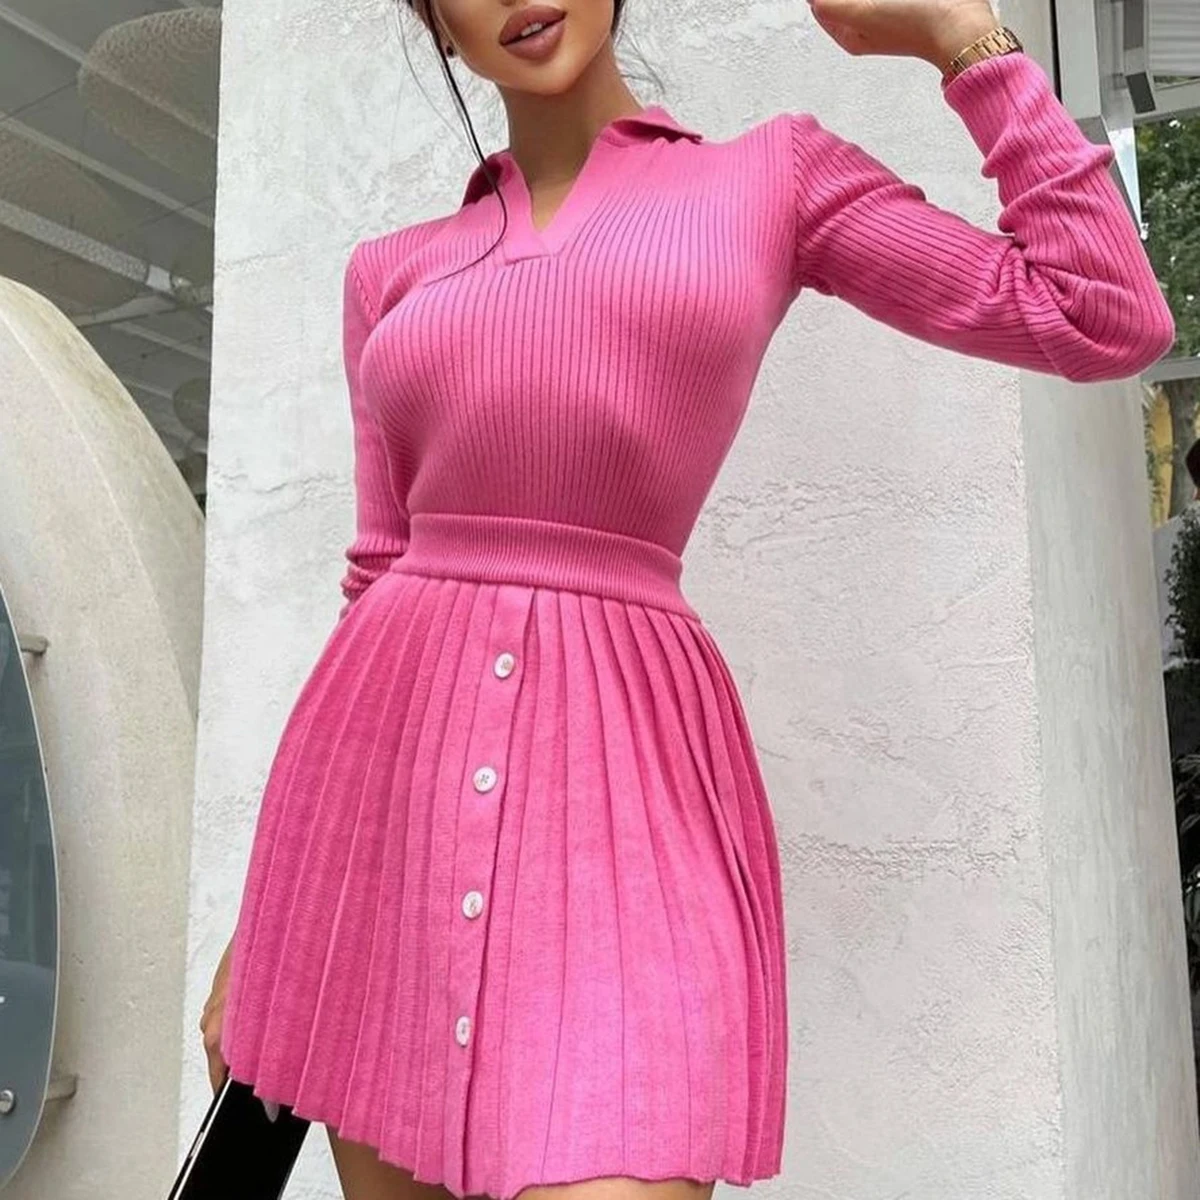 New Autumn Women Sweater+Knitted Skirt Set Winter Suit 2 Piece Ladies Winter Knitting Korea Long Sleeve V Neck Tops and Mini